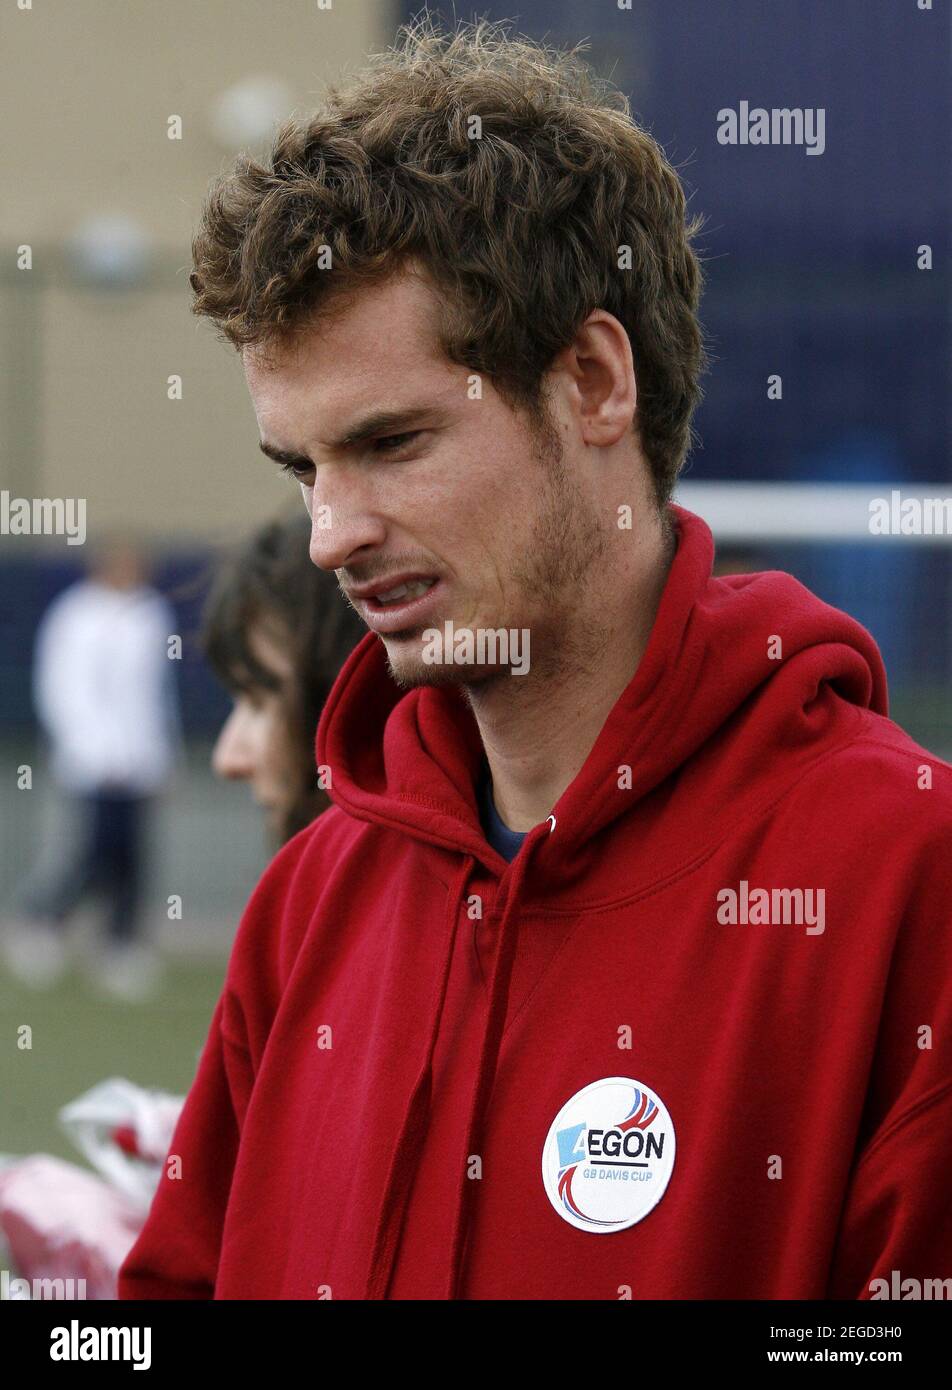 Tennis / Football - Andy Murray visits the Everton FC Training Ground prior  to the GB Davis Cup tie at the Liverpool Echo Arena - Everton Training  Ground, Finch Farm - 15/9/09